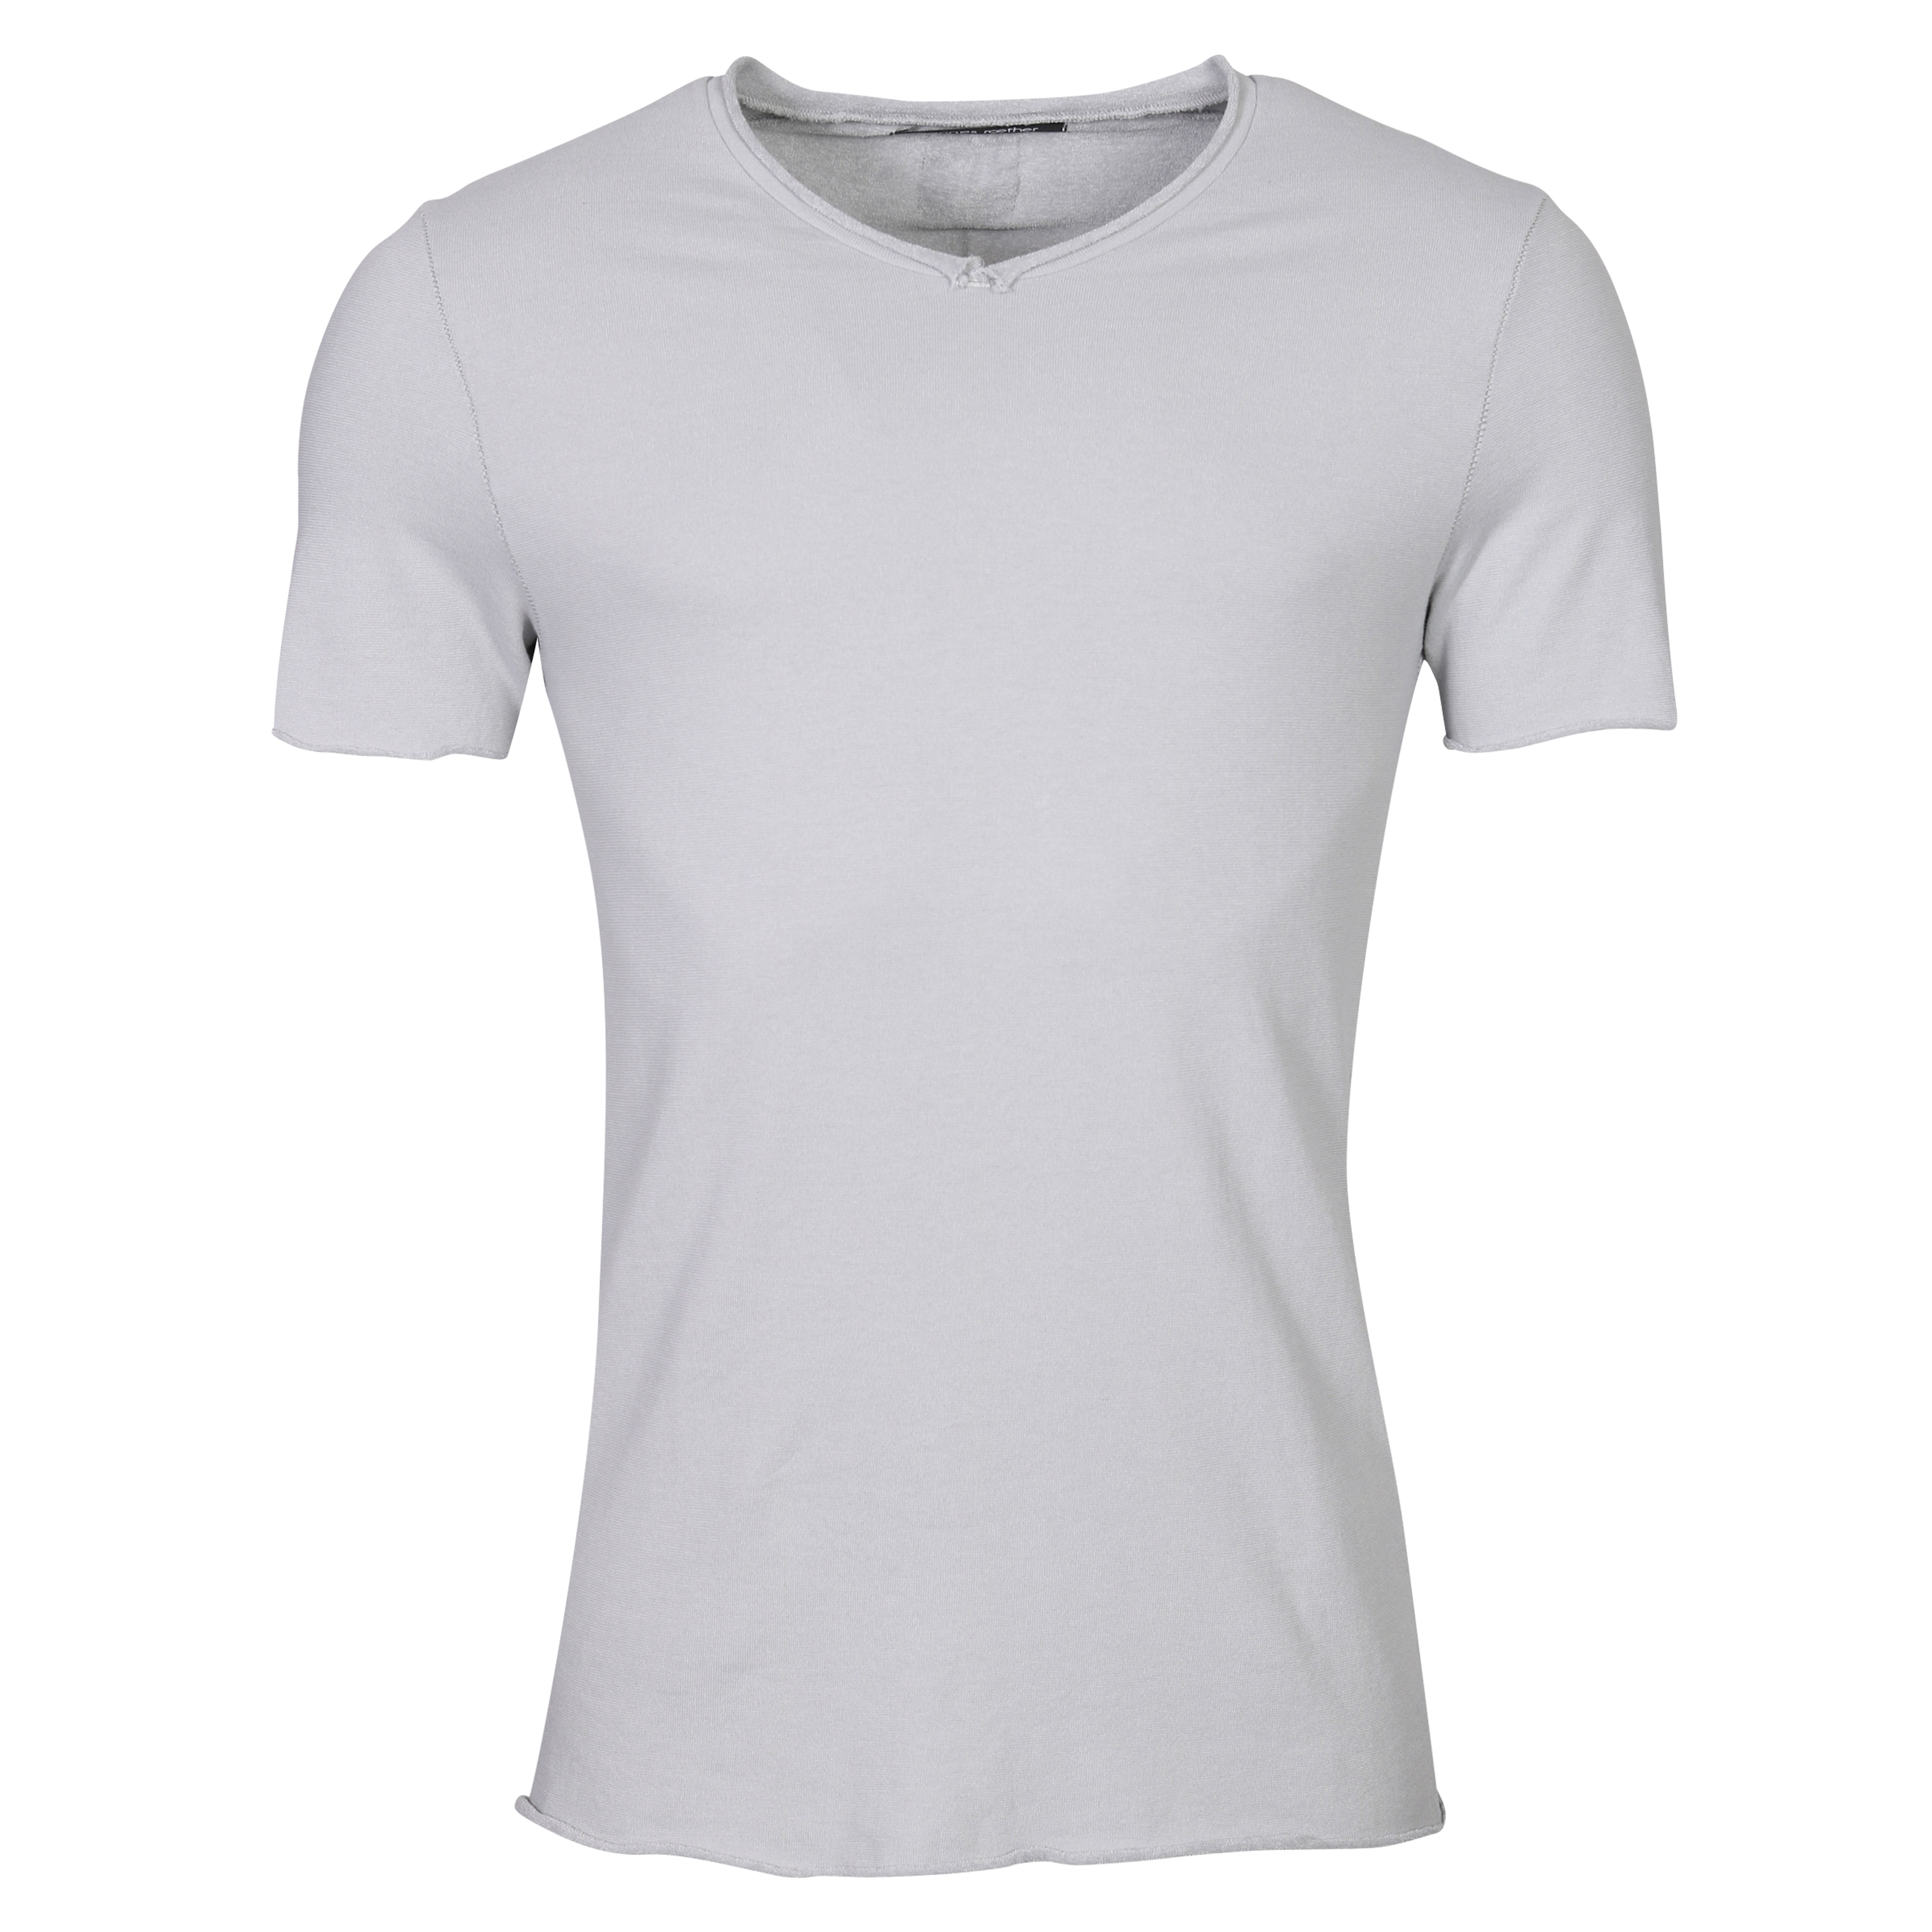 Hannes Roether Frottee V-Neck T-Shirt in Mouse